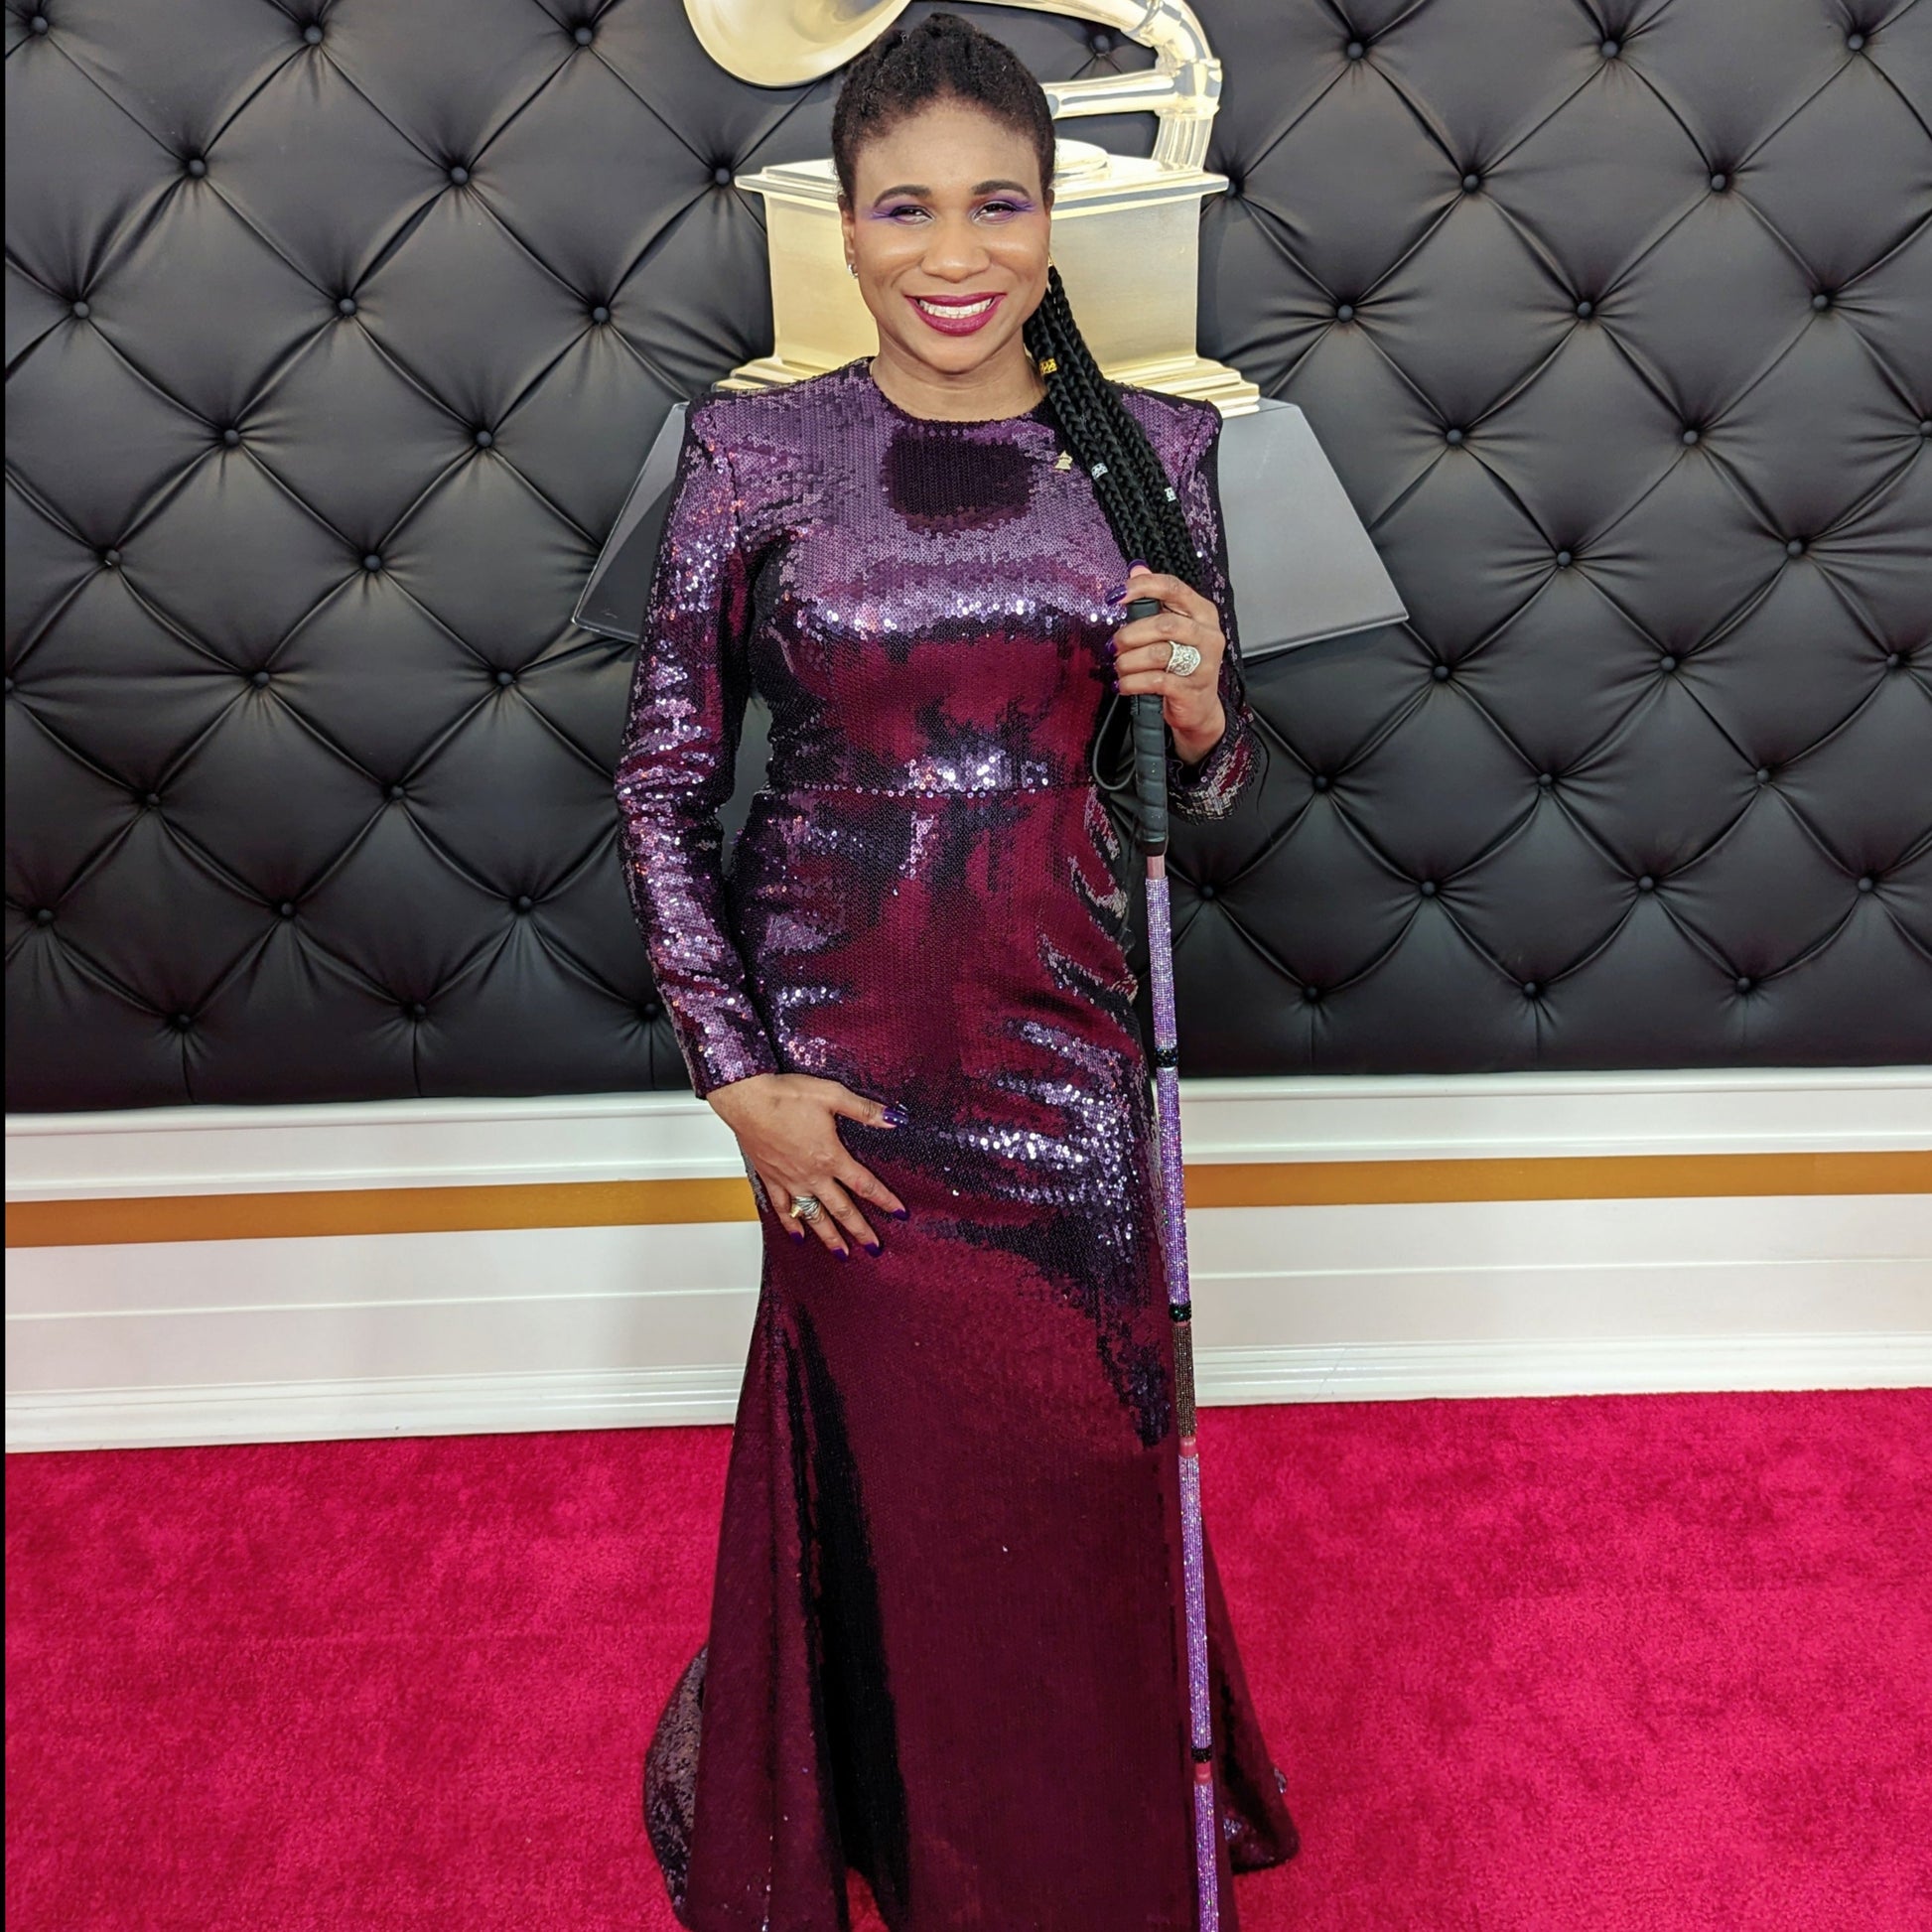 Lachi, a black woman with cornrows, poses at the Grammy Red Carpet in an elegant purple dress and purple rhinestone glam cane